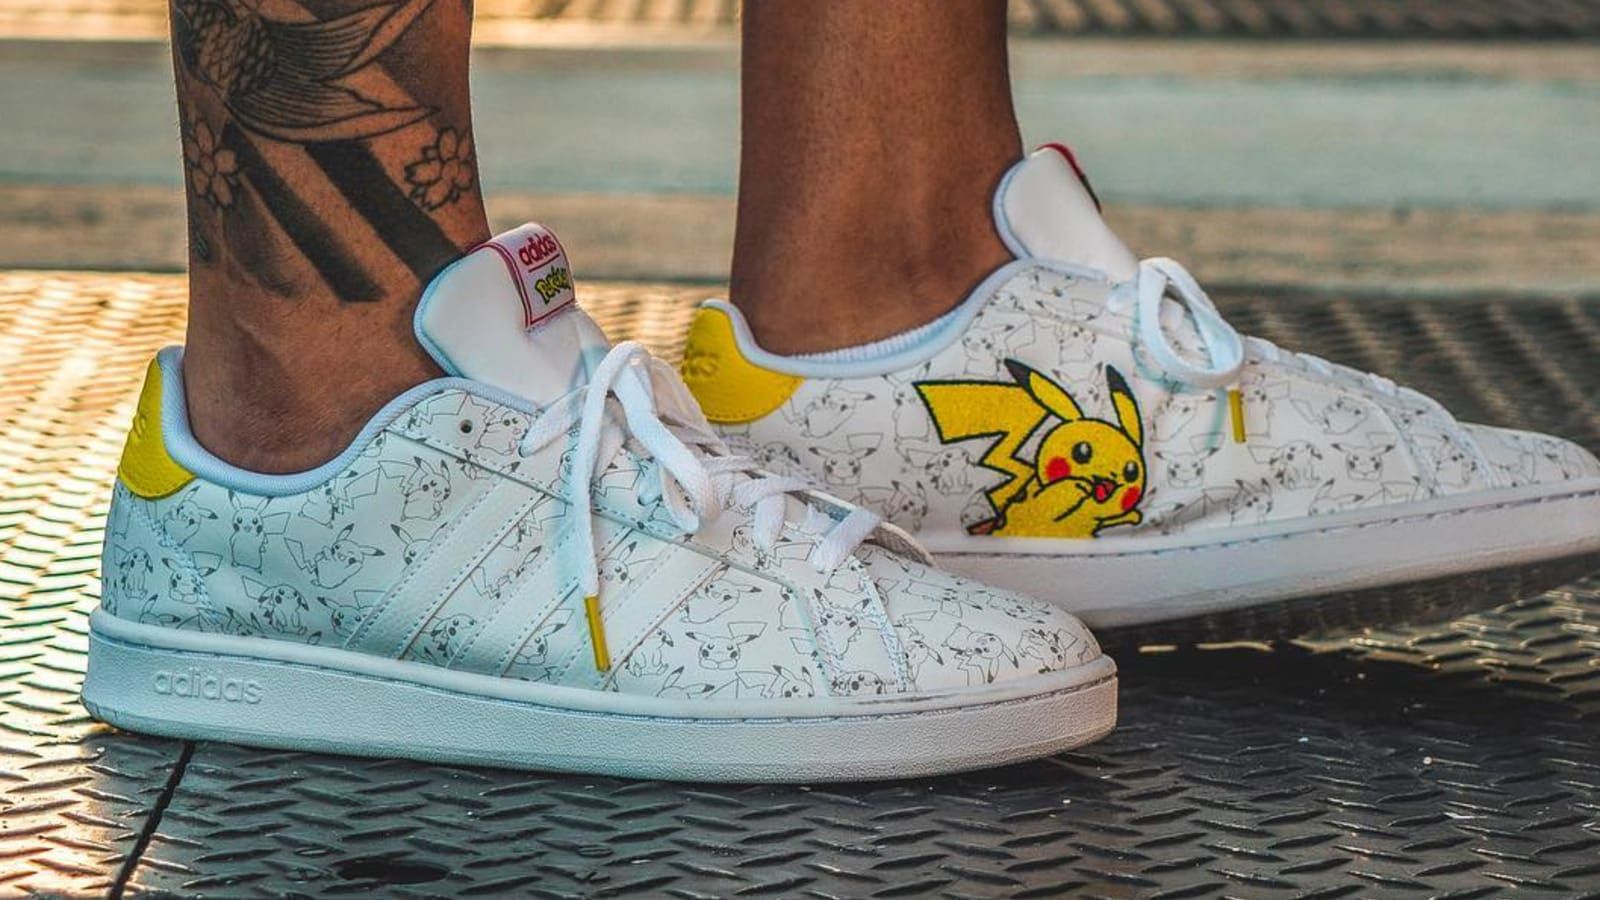 Pikachu and the Limelight New Adidas Pokemon Sneakers